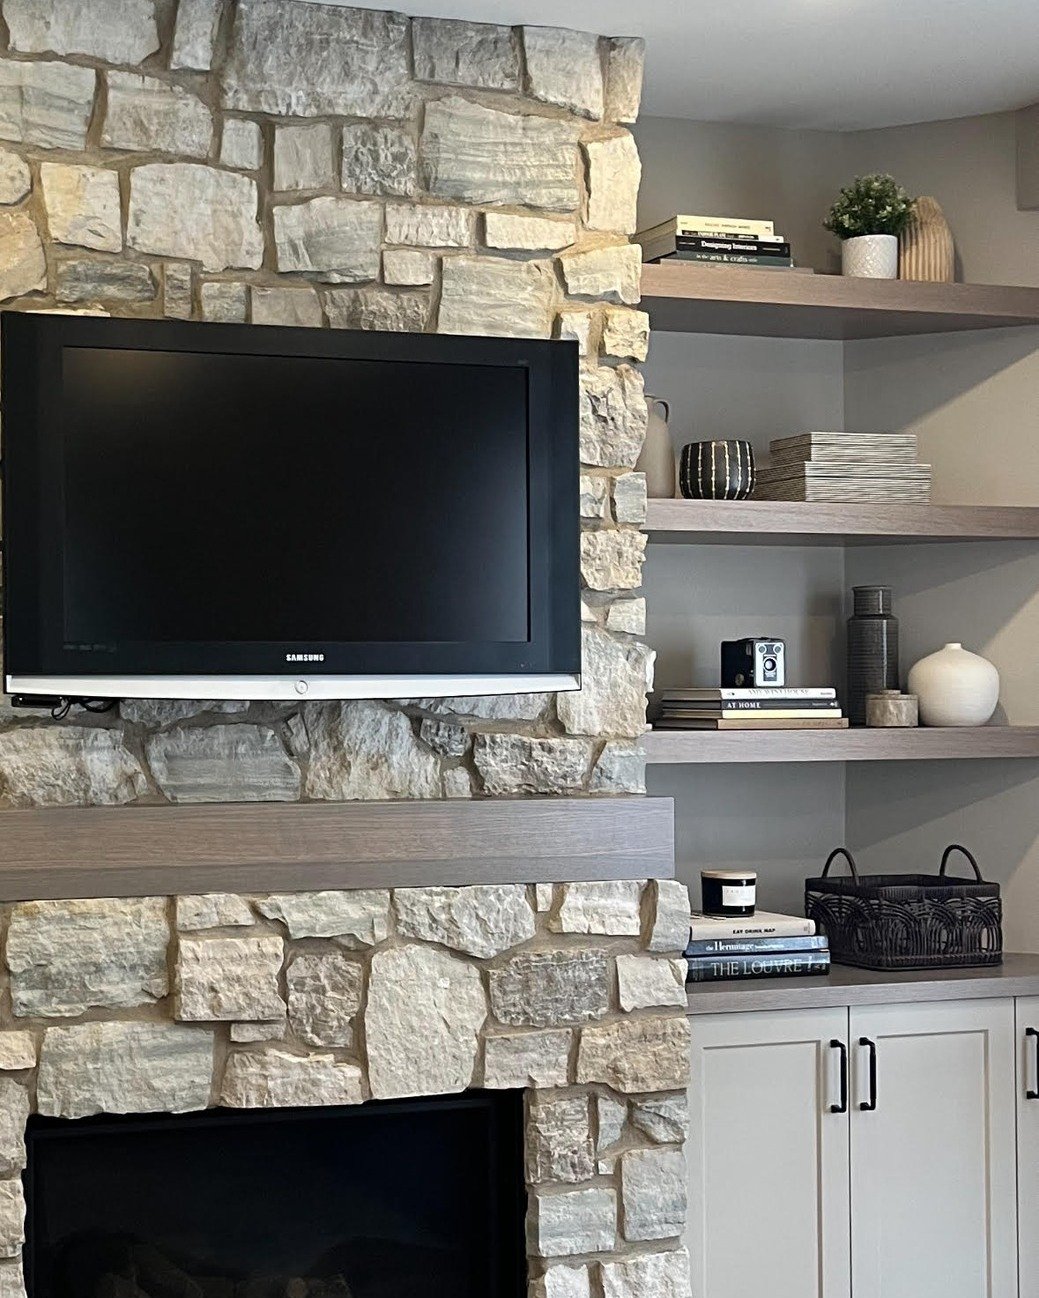 Incorporating stone brings timeless beauty to any space! 🕰️✨

For this living room renovation, we opted for a natural stone veneer fireplace and layered it with a stained oak mantel, floating shelves and built-in cabinetry for storage.

Combining na